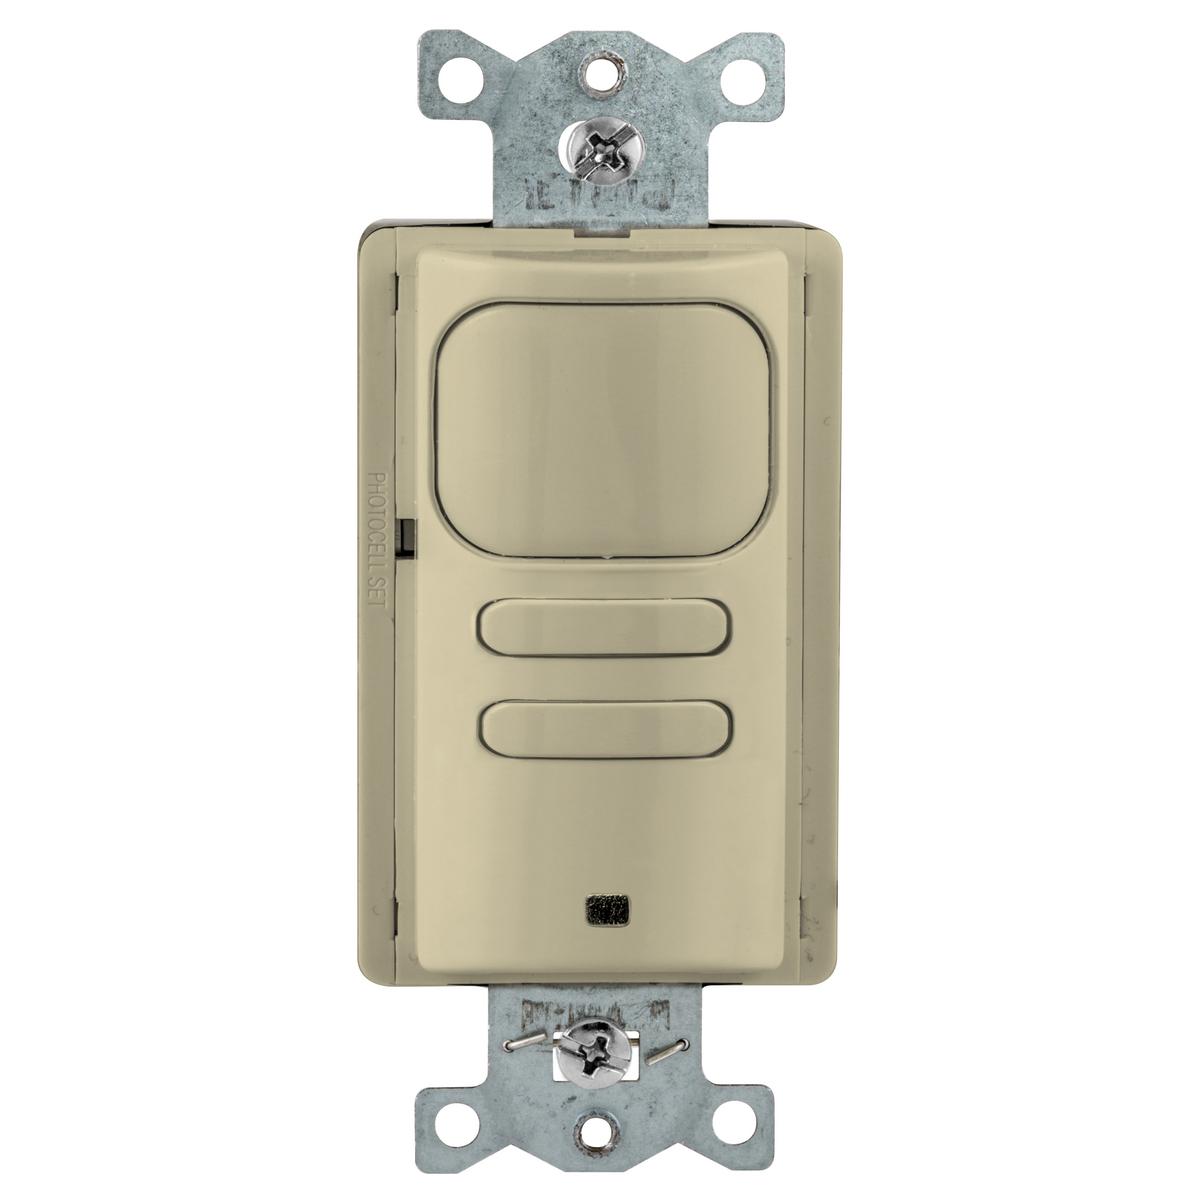 Hubbell AP2000I22 Occupancy/Vacancy Sensors, Wall Switch,Adaptive Passive Infrared, 2 Circuit, 120/277V AC, Ivory 